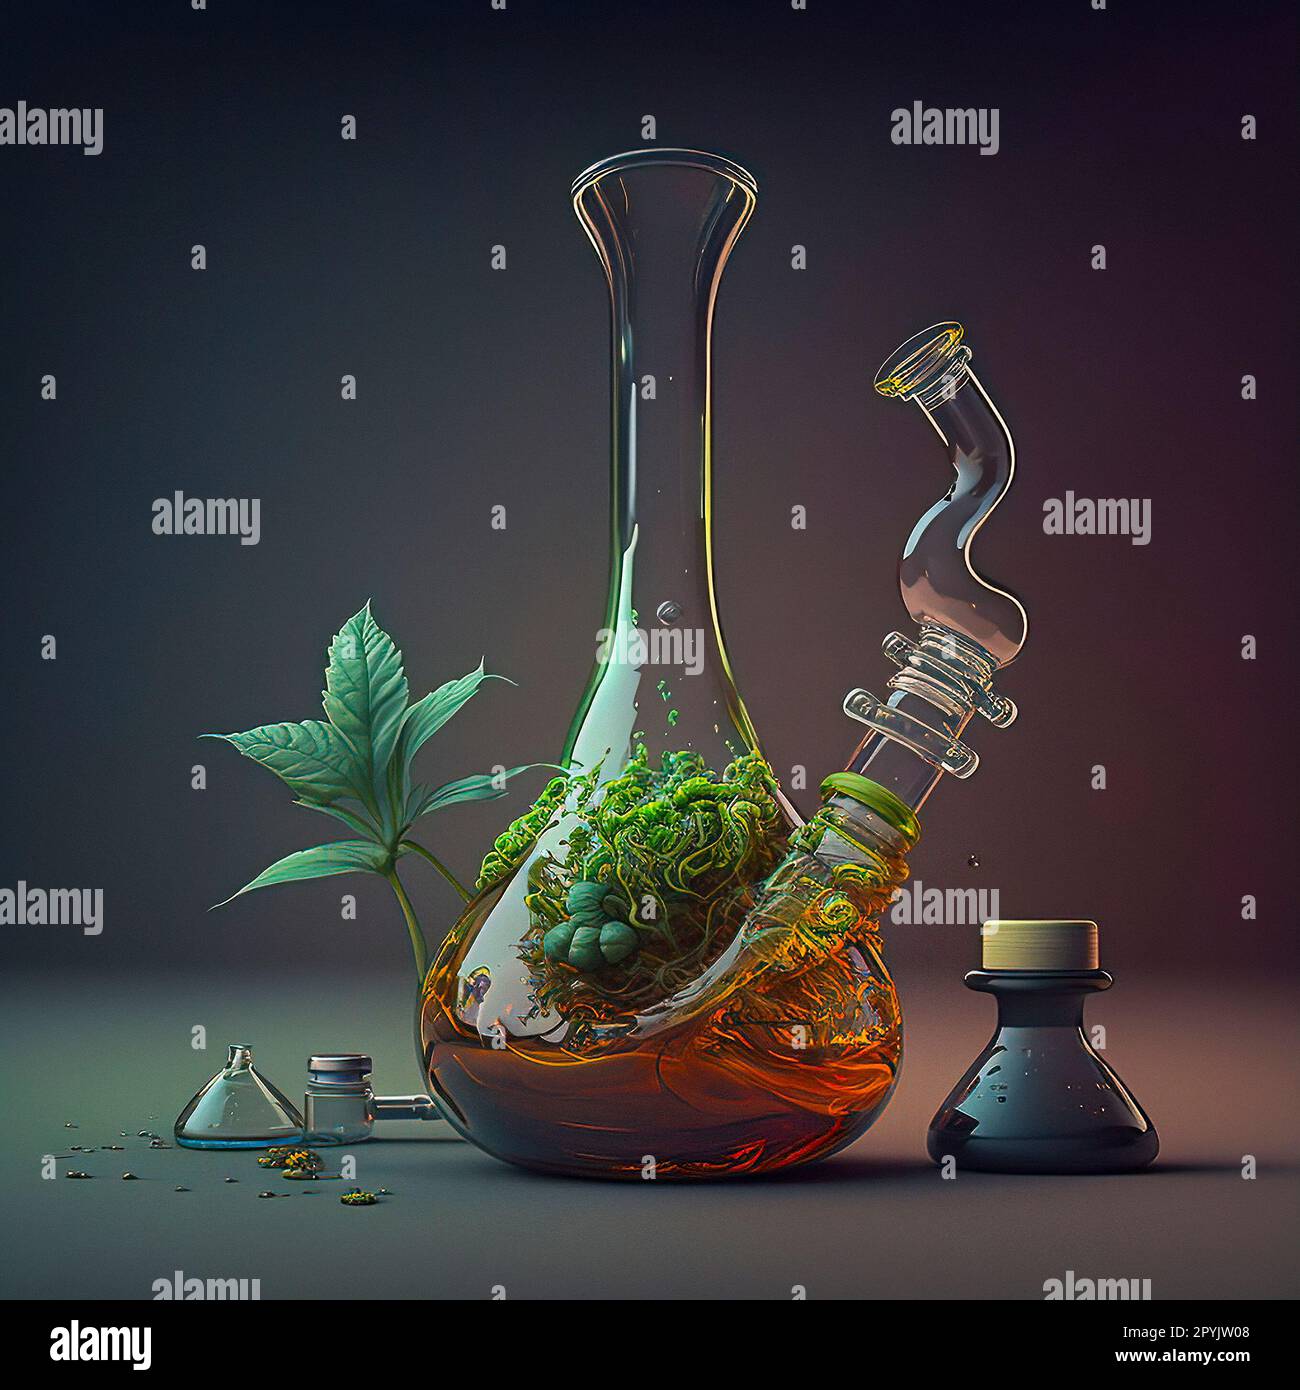 A Stunning Biopunk Art of a Glass Bong Filled with an Orange-colored  Magical Potion and a Herb Growing out of It Stock Photo - Alamy